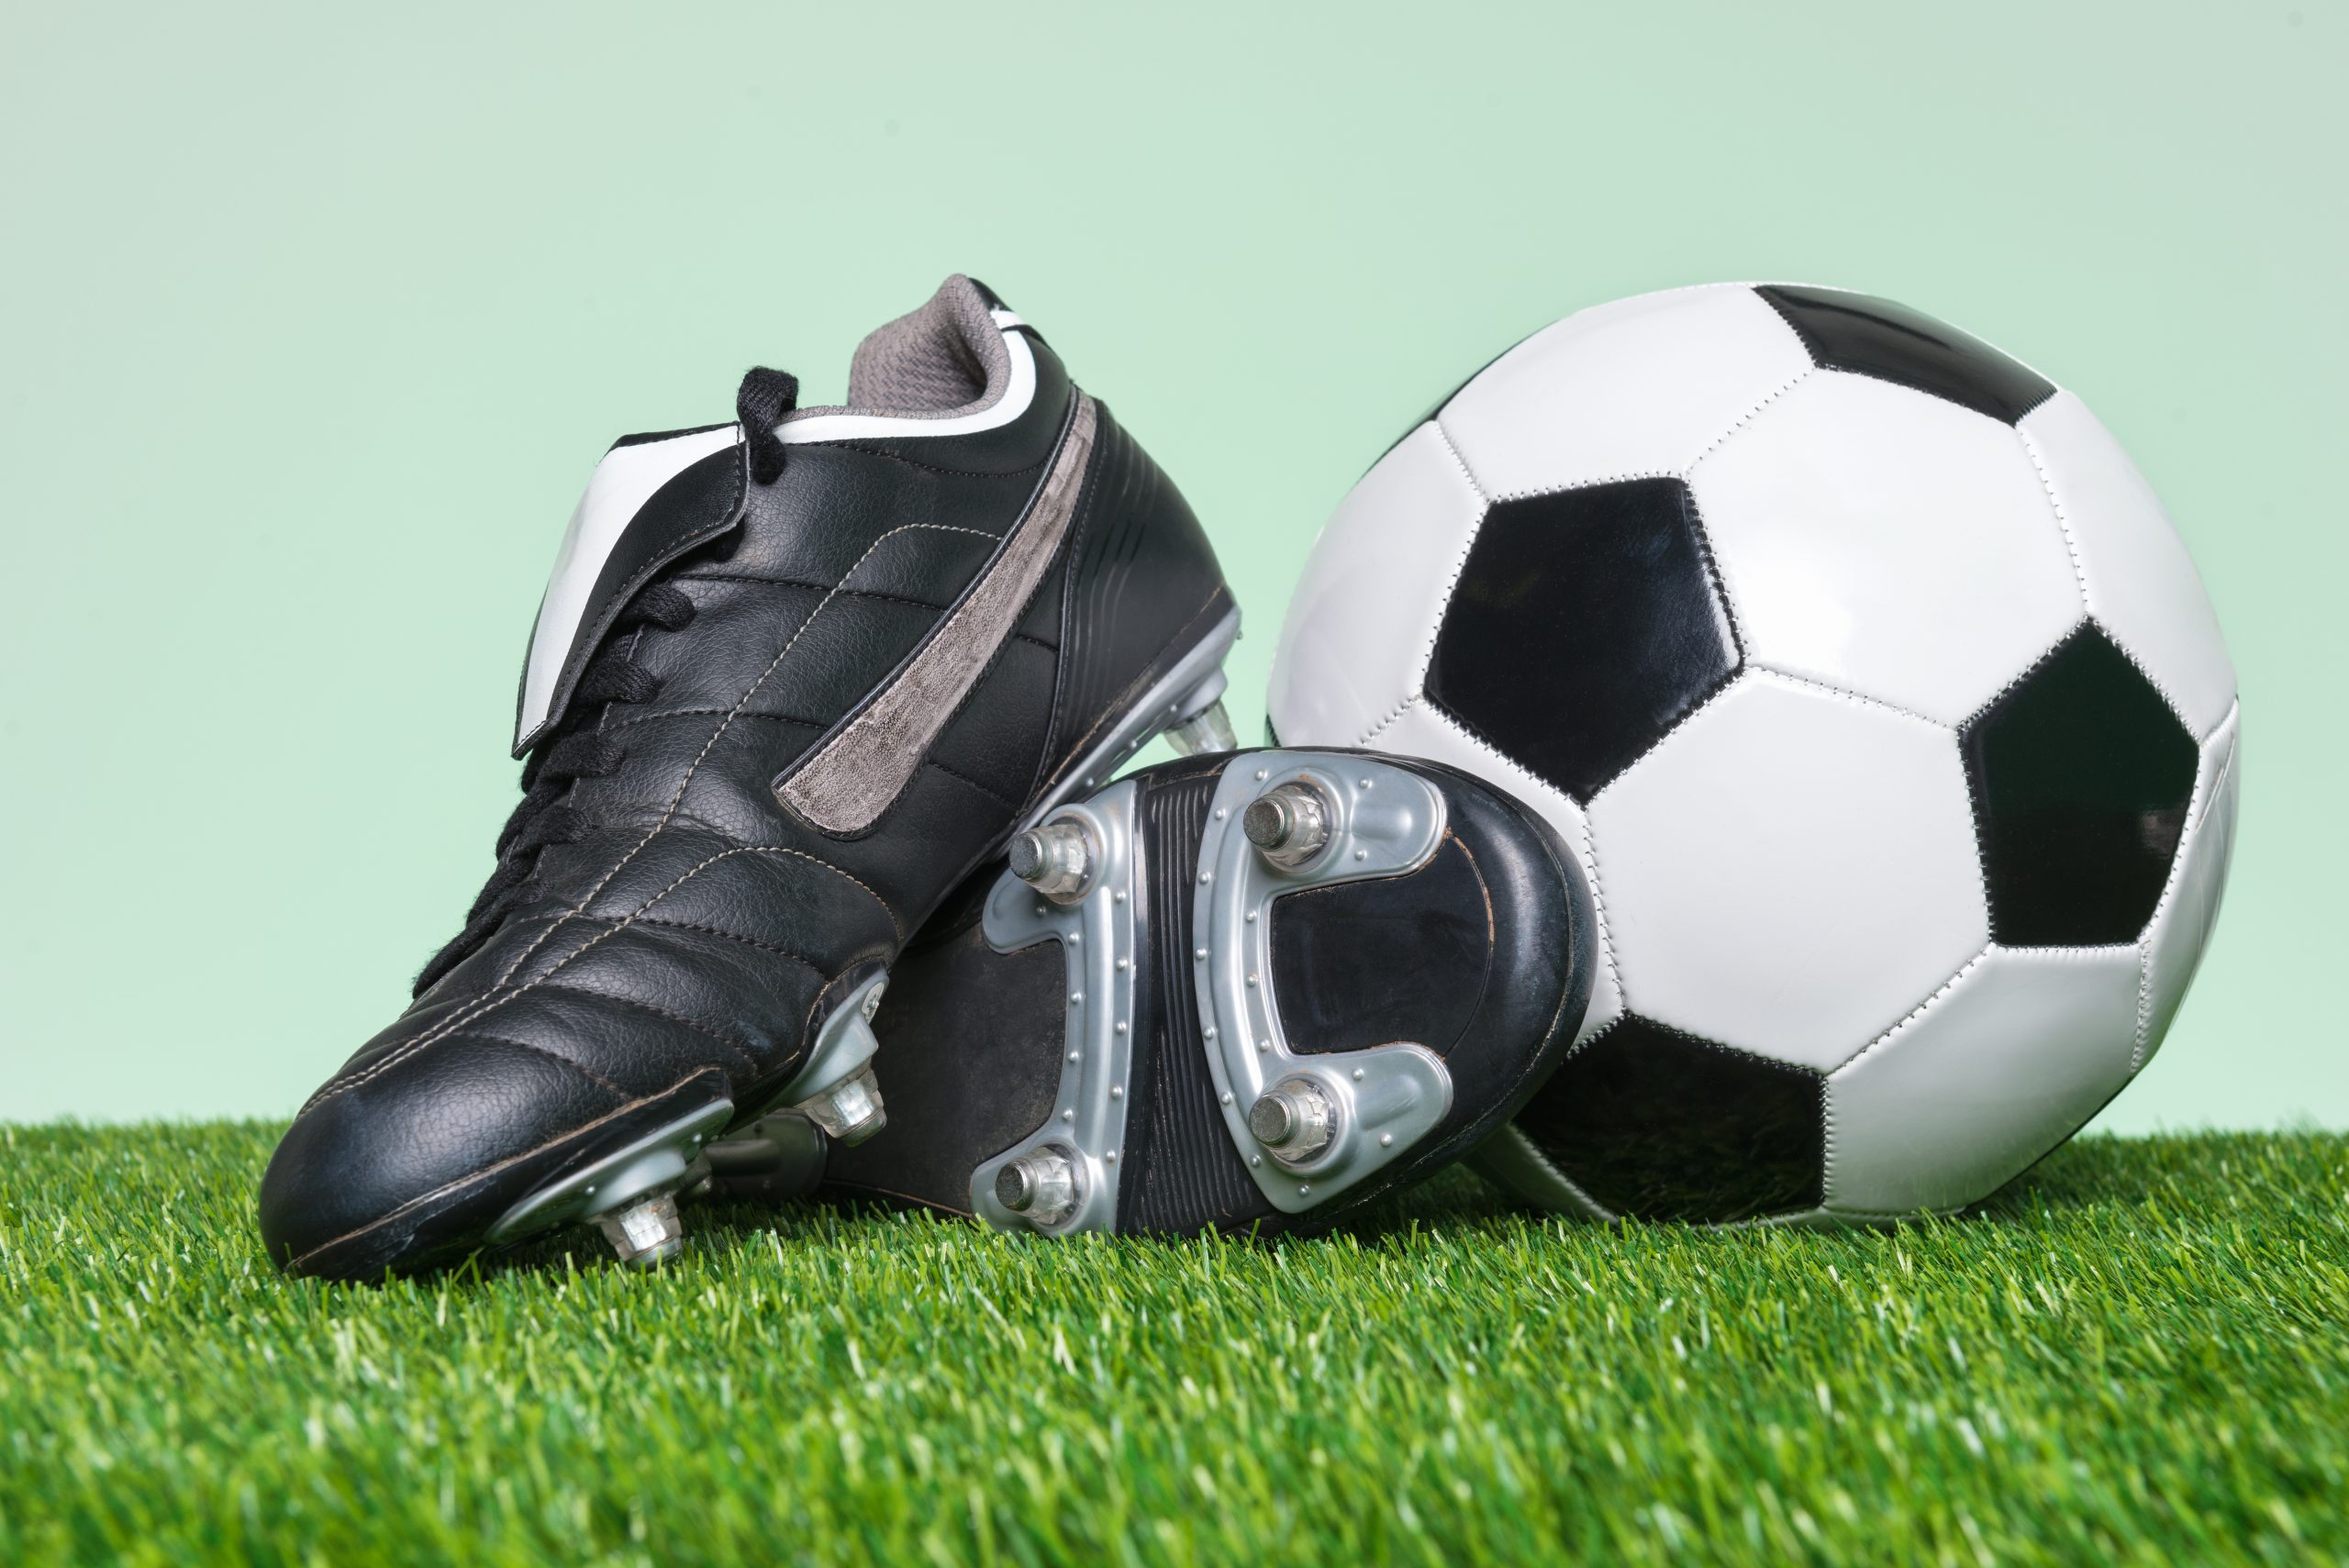 Football or Soccer boots and ball on grass